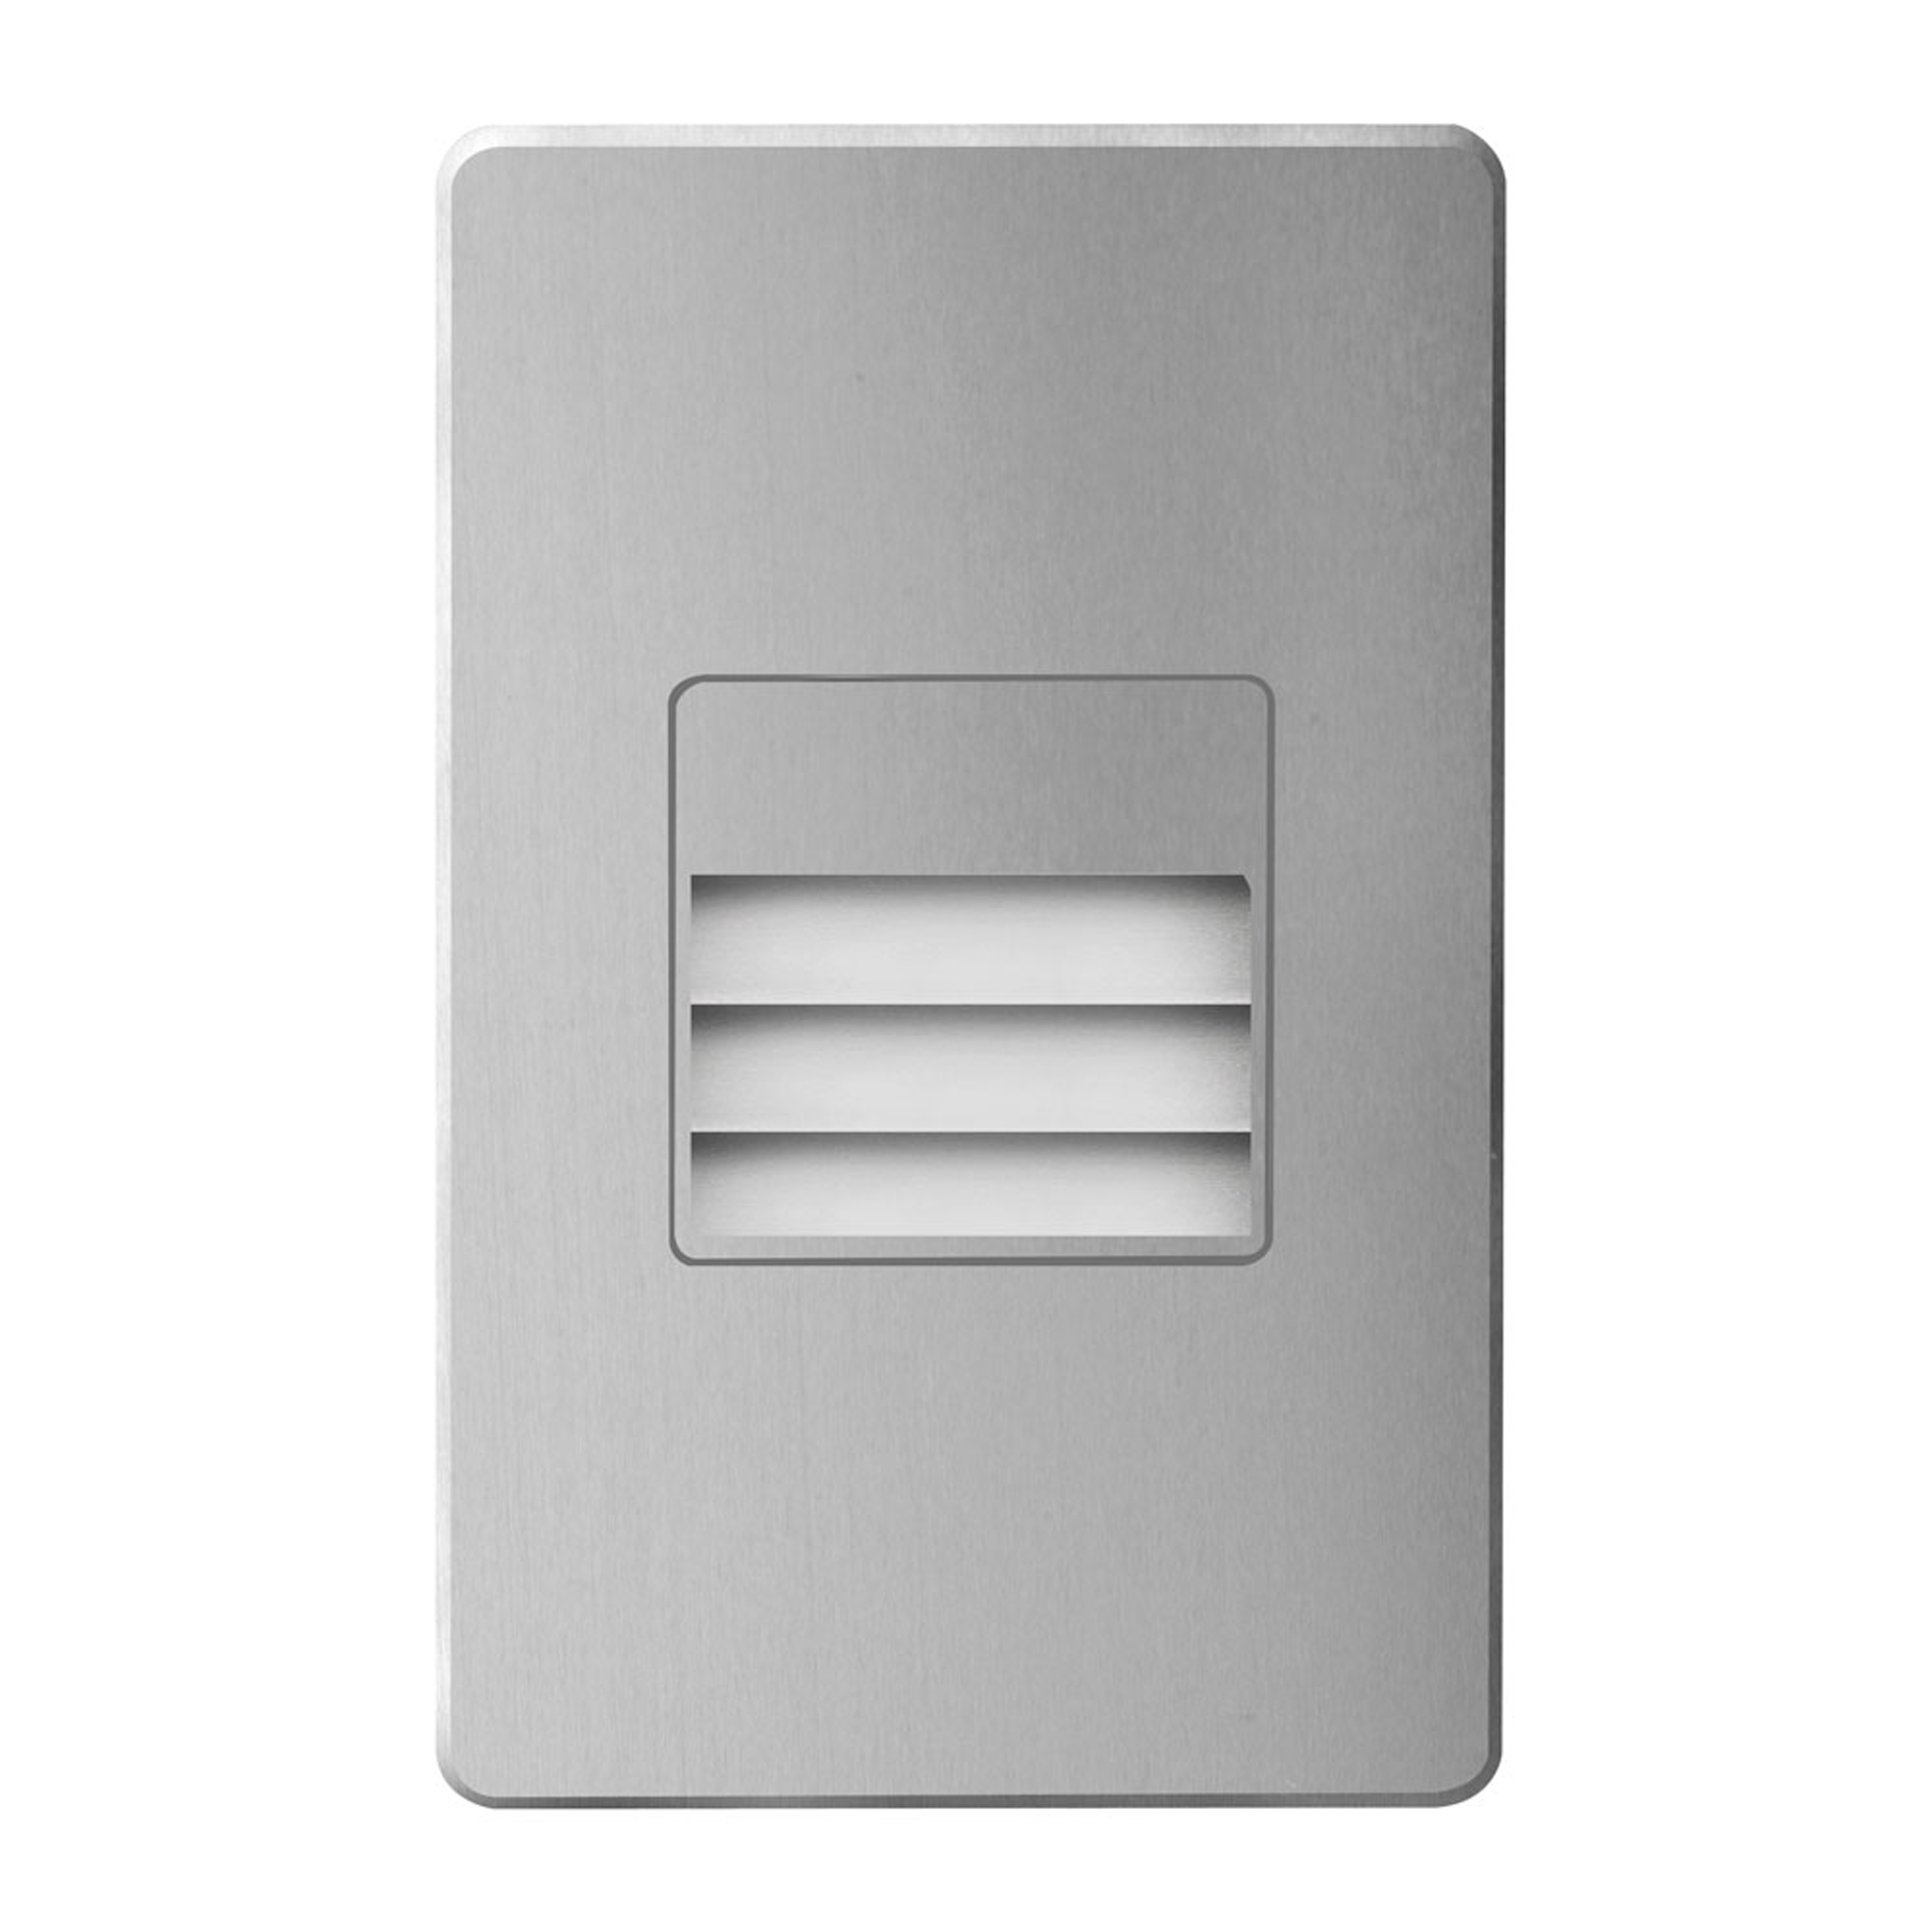 120VAC input, L125mmxW78mmxH37mm, 2700K, 3.3W IP65,  Brushed Aluminum Wall LED Light with Louver.